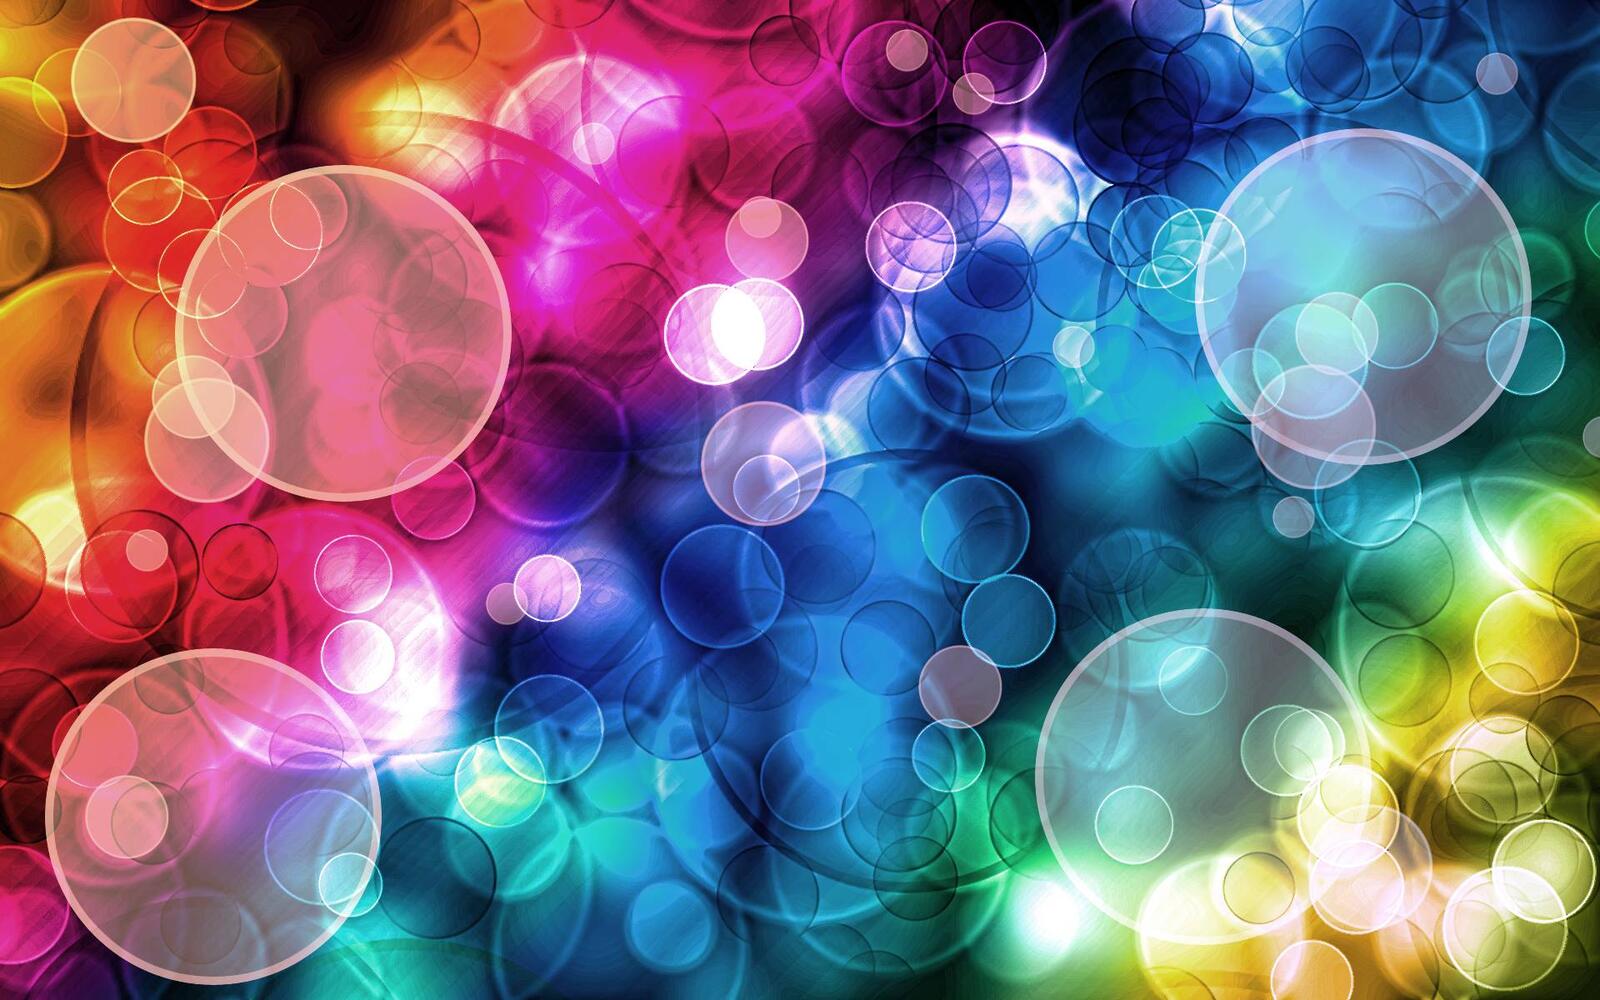 Wallpapers texture background circles on the desktop